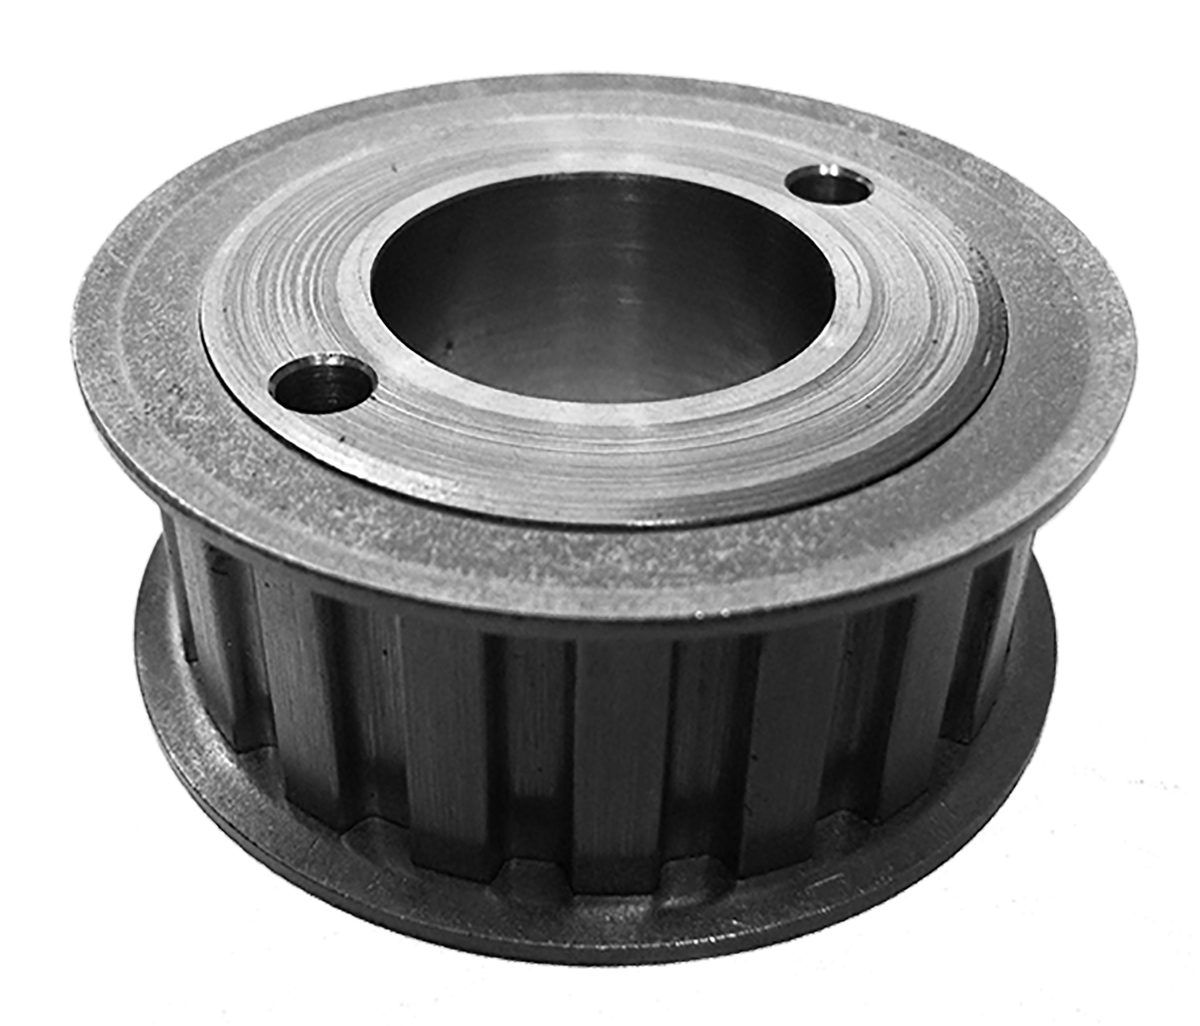 72LH075 - Cast Iron Imperial Pitch Pulleys